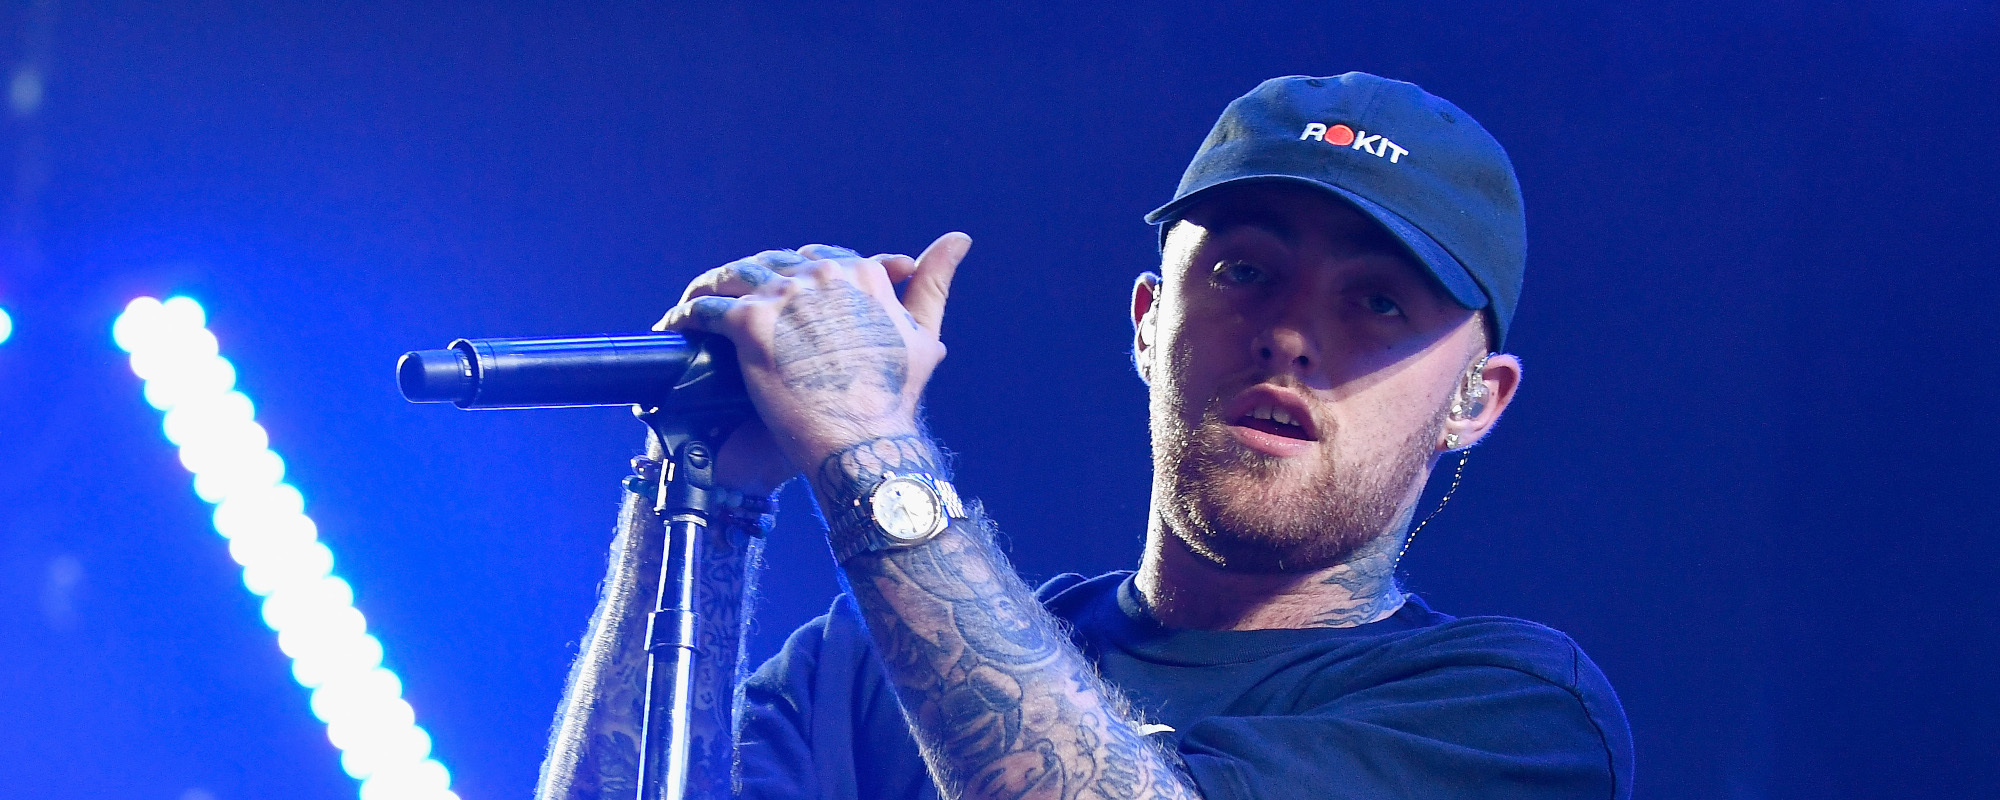 Mac Miller Posthumous Album with Madlib on the Way, Producer Says